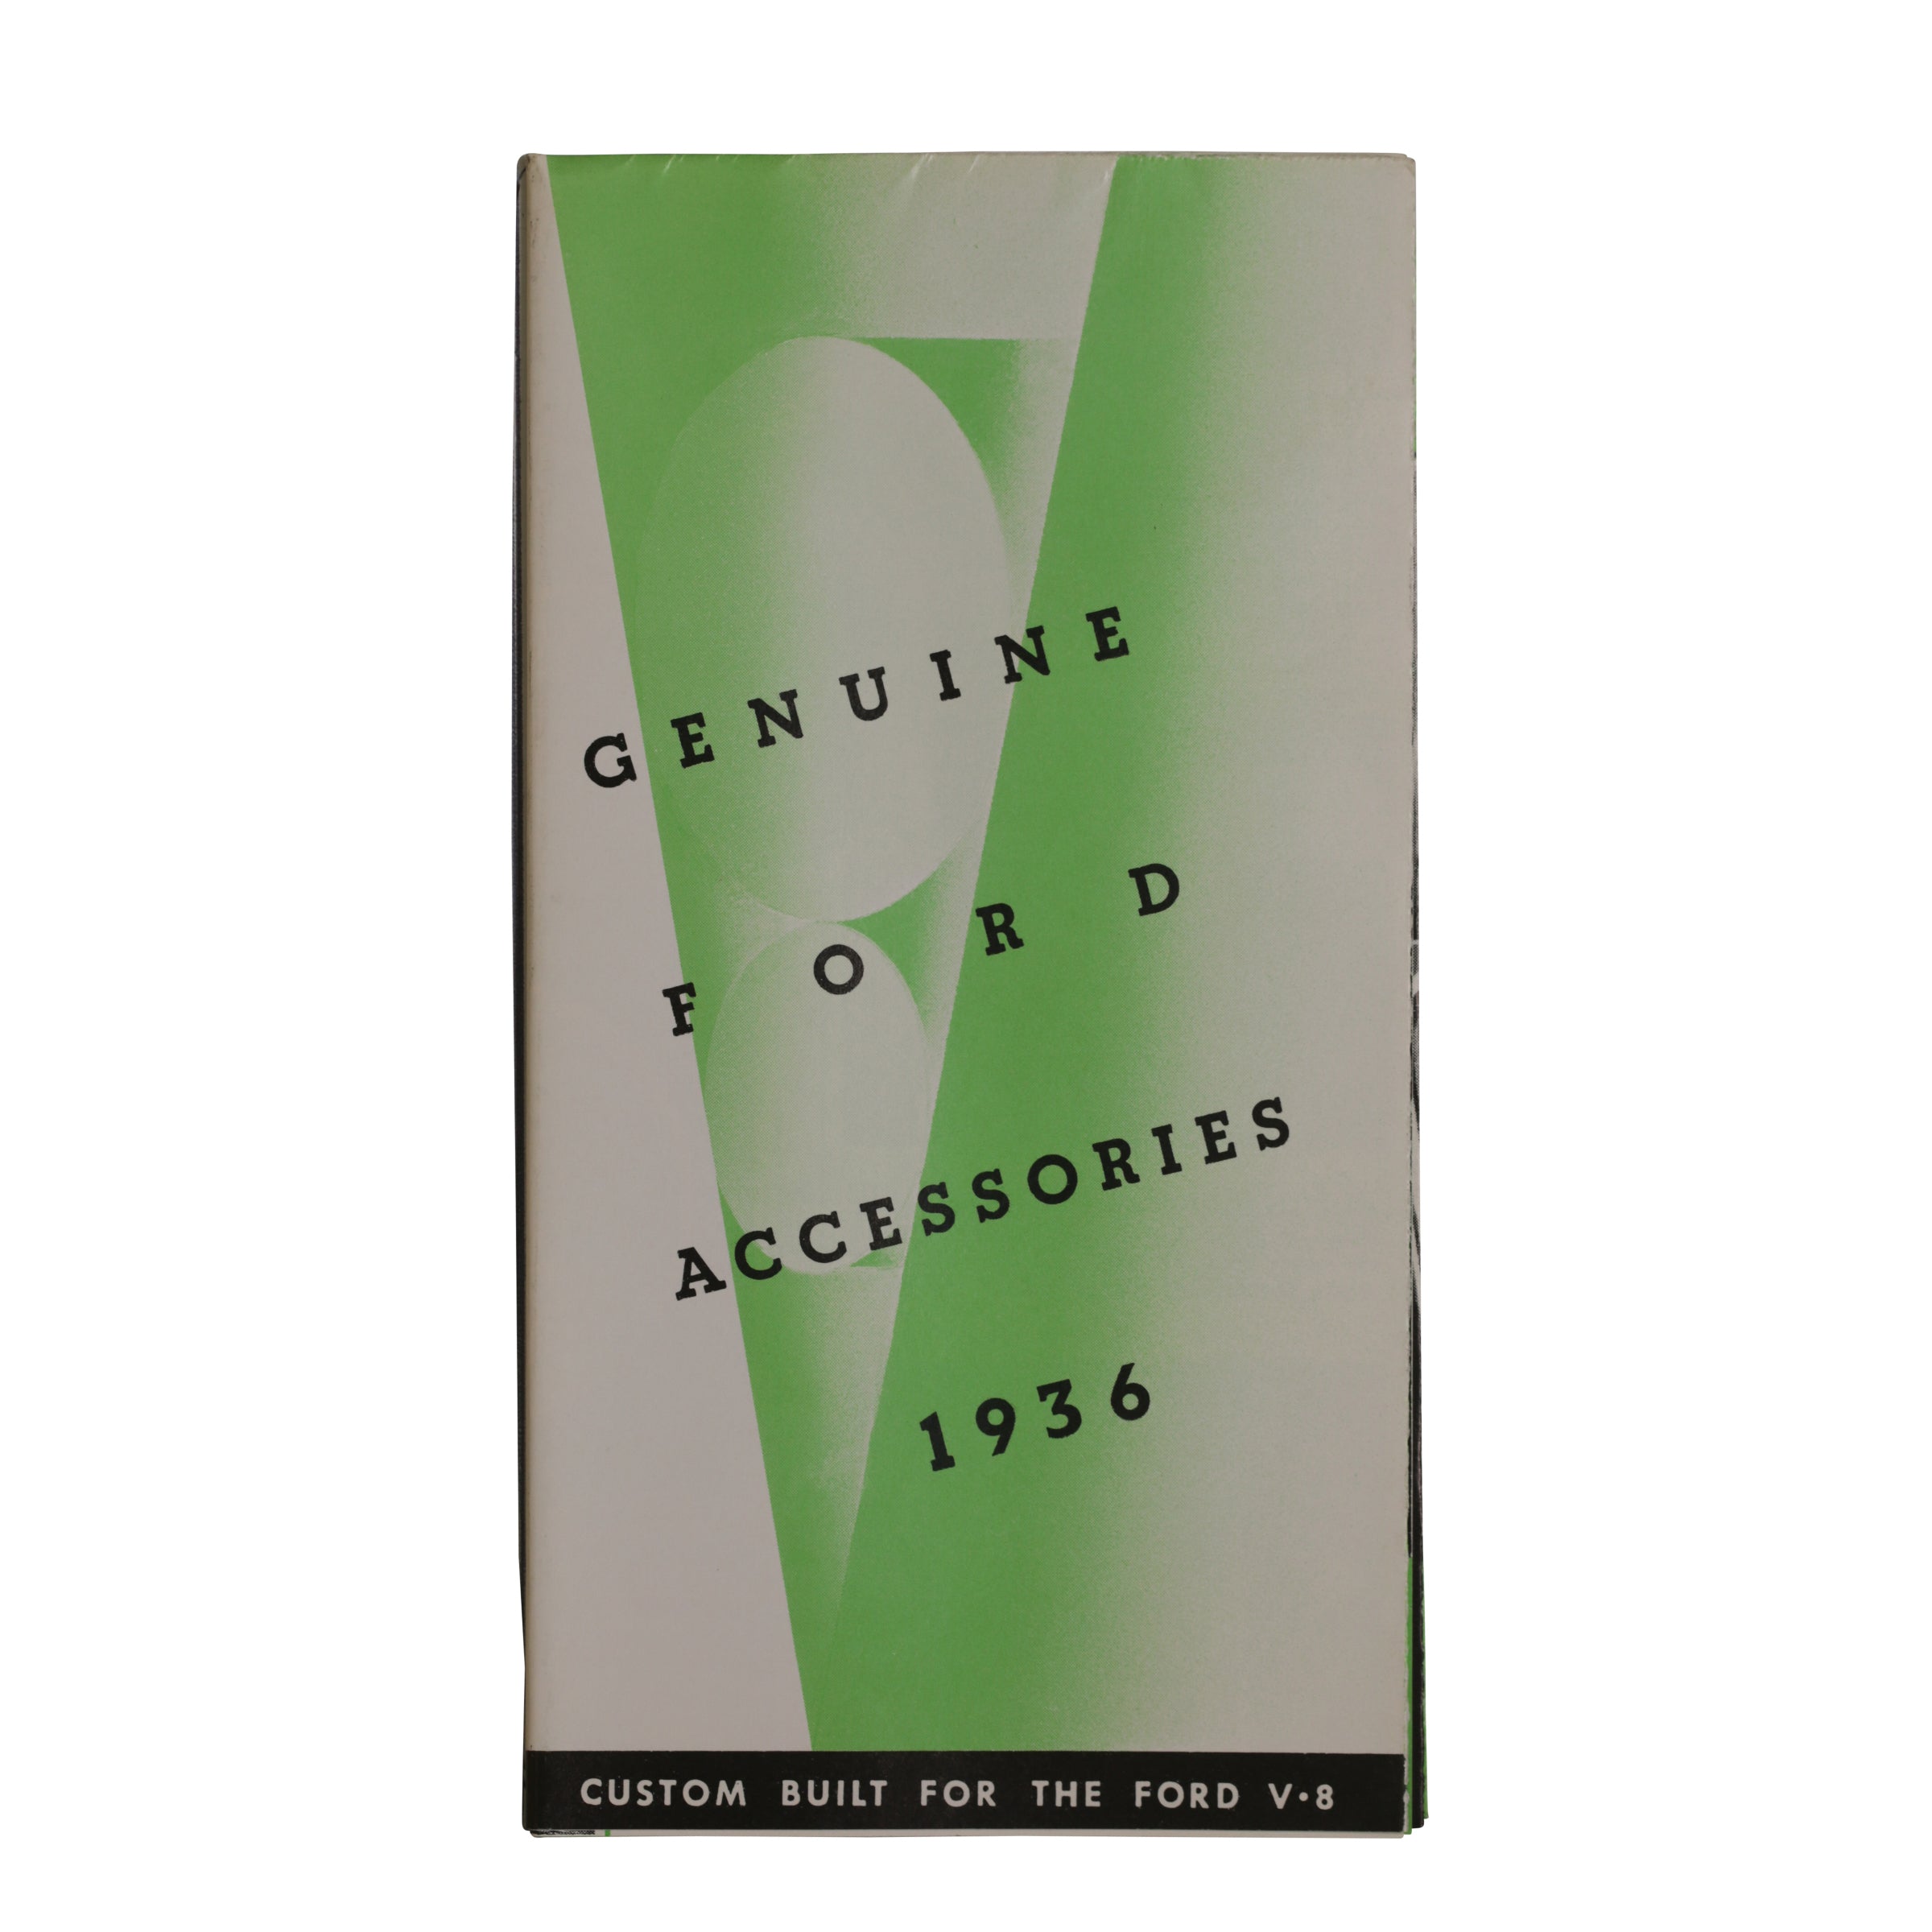 Accessories Brochure  • 1936 Ford